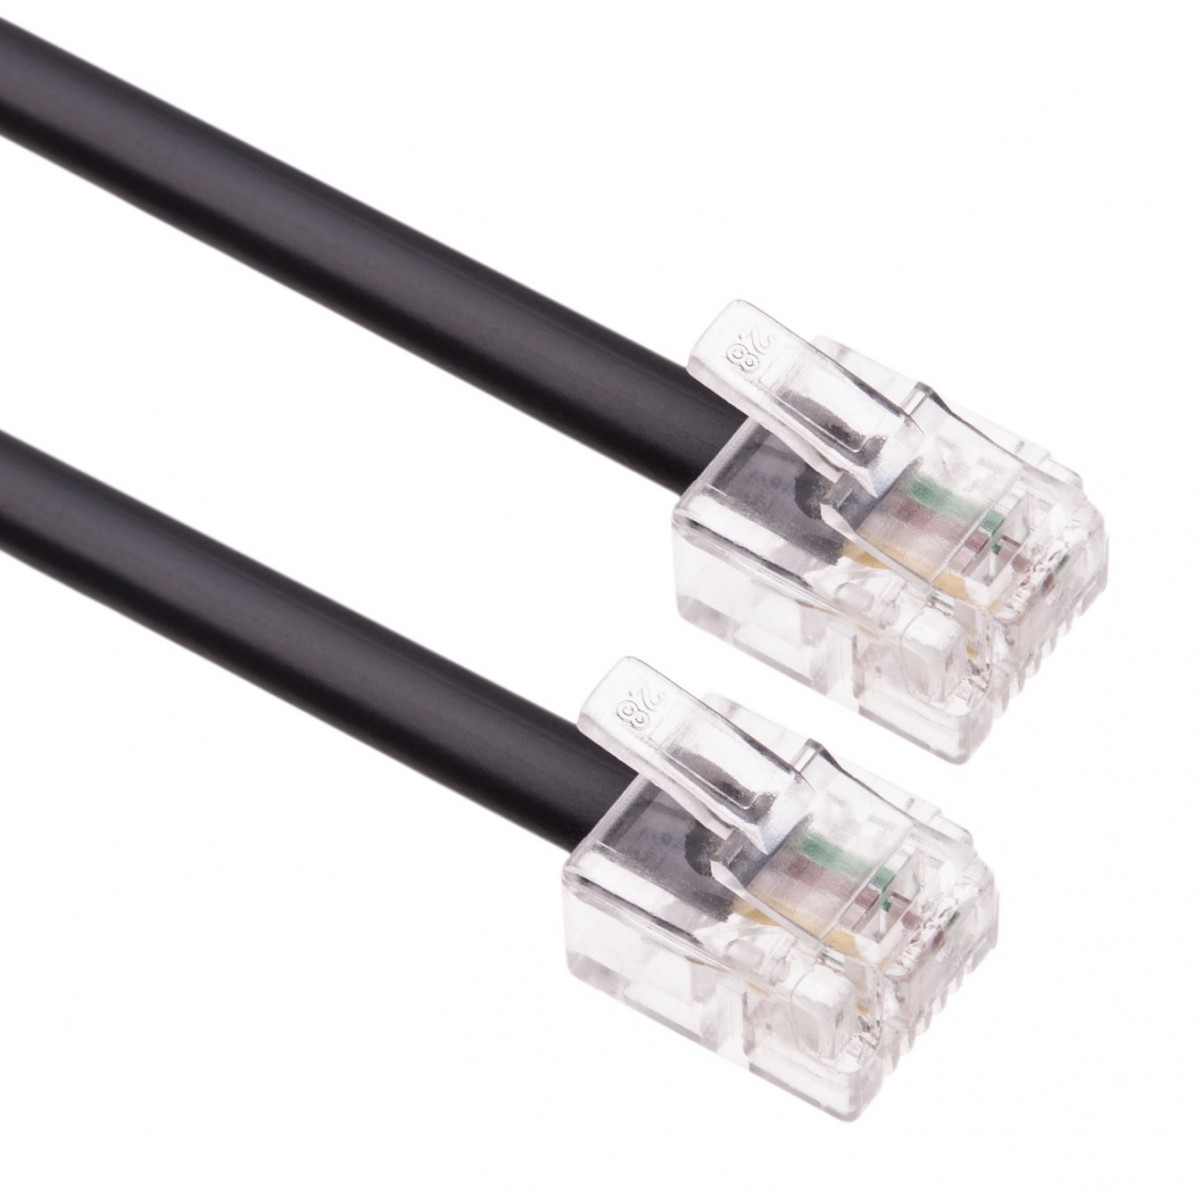 Available in 1m, 2m, 3m, 5m, 10m, 15m, 20m 15m Broadband Data 4 wire Flat Cable Lead MainCore 15m long White RJ11 to RJ45 / ADSL Modem